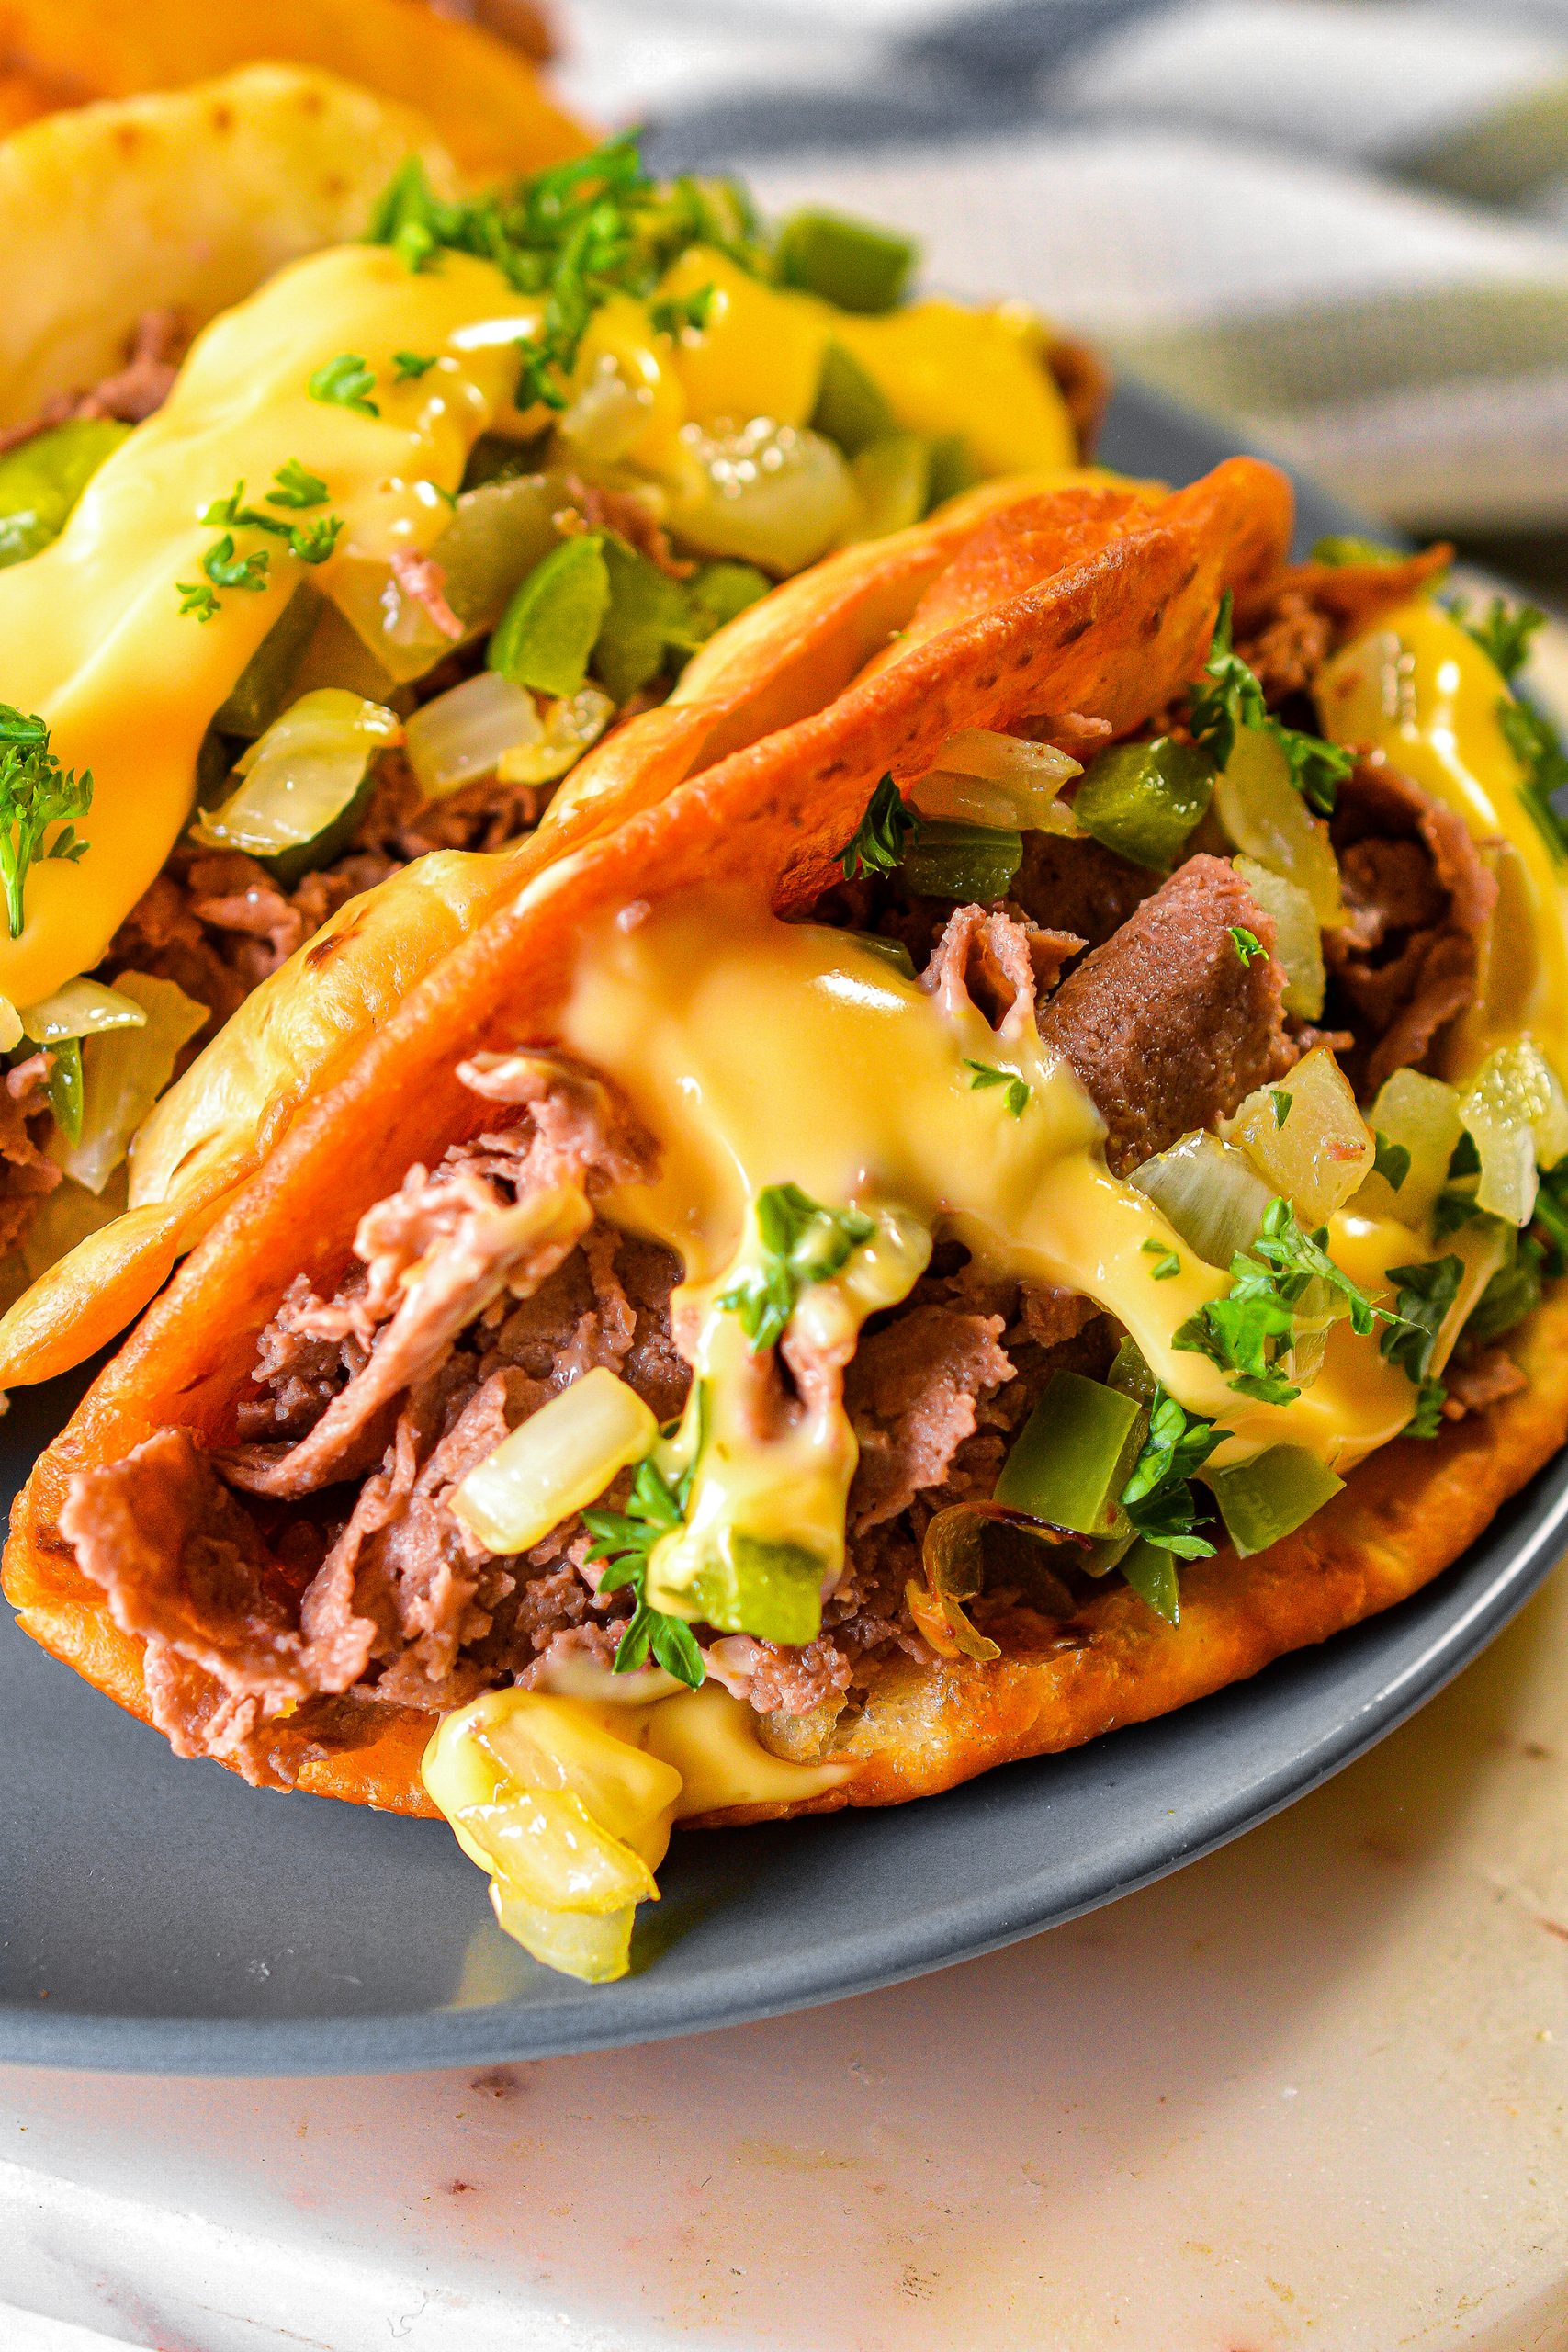 philly cheesesteak tacos, philly cheese steak tacos, cheese steak tacos